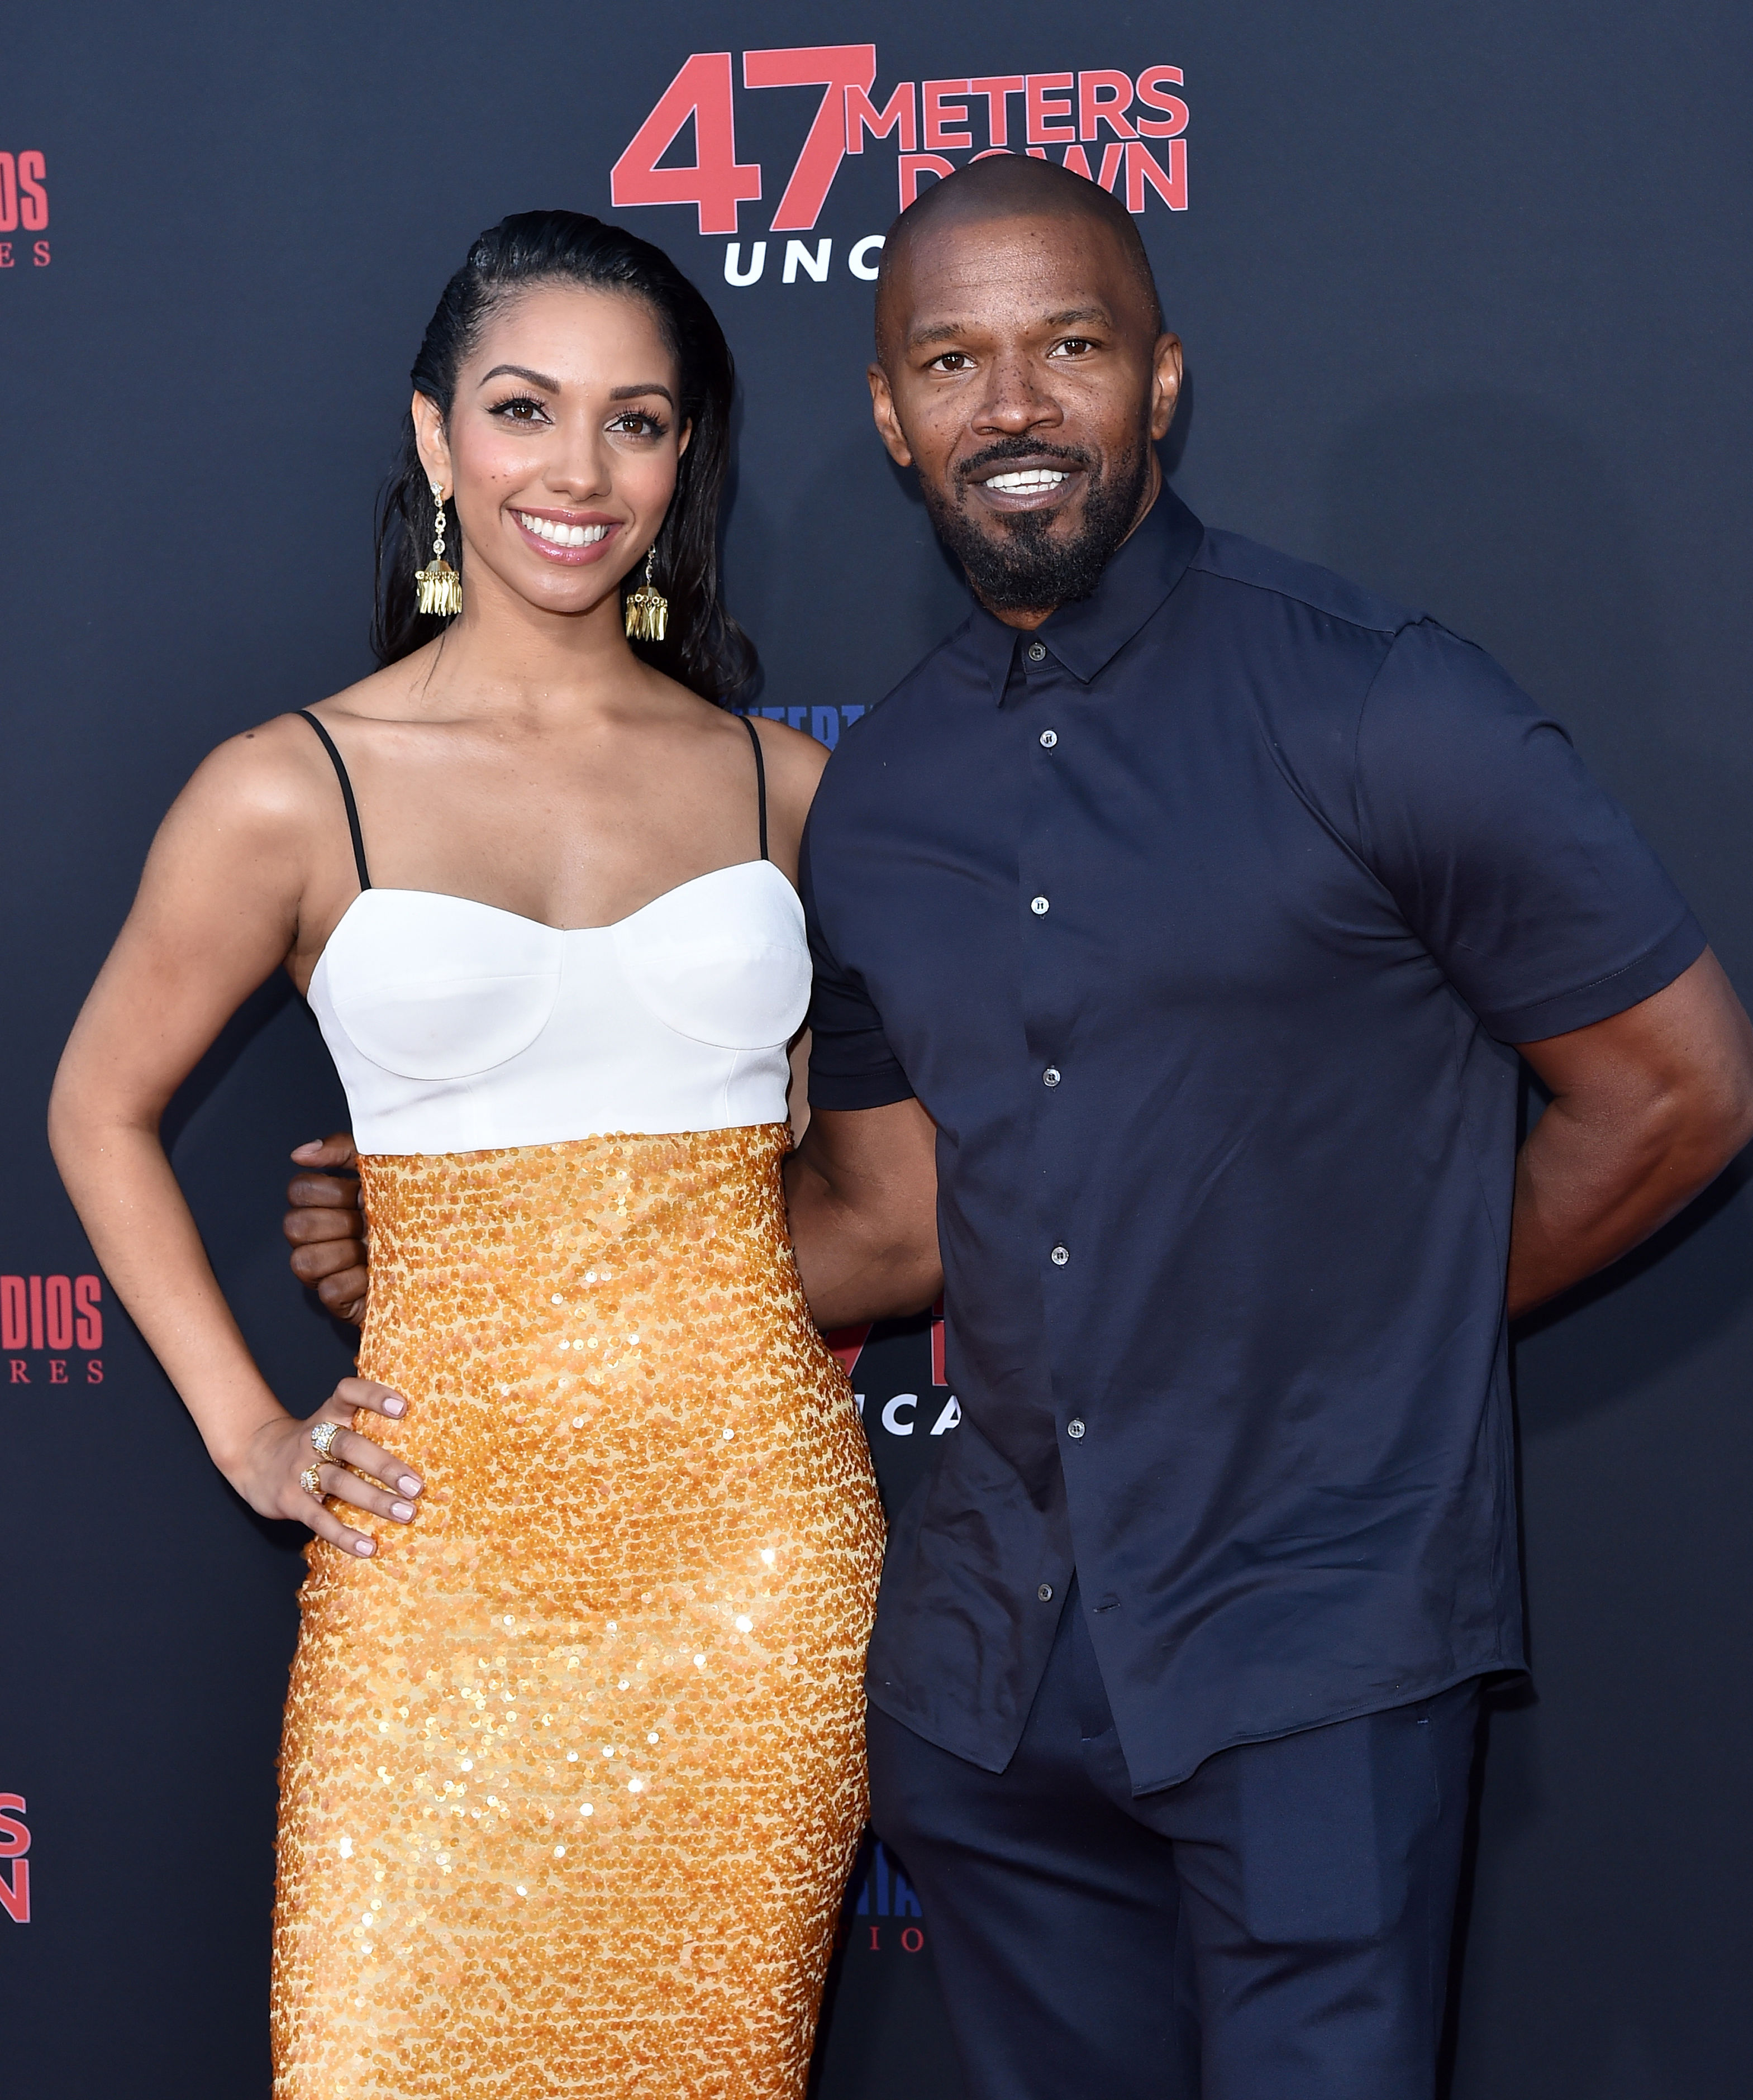 <p>Corinne Foxx (who was born in 1994) studied public relations at the University of Southern California before going to acting school. She was joined by proud dad <a href="https://www.wonderwall.com/celebrity/profiles/overview/jamie-foxx-722.article">Jamie Foxx</a> at the premiere of her first film, "47 Meters Down: Uncaged," in Los Angeles on Aug. 13, 2019.</p>